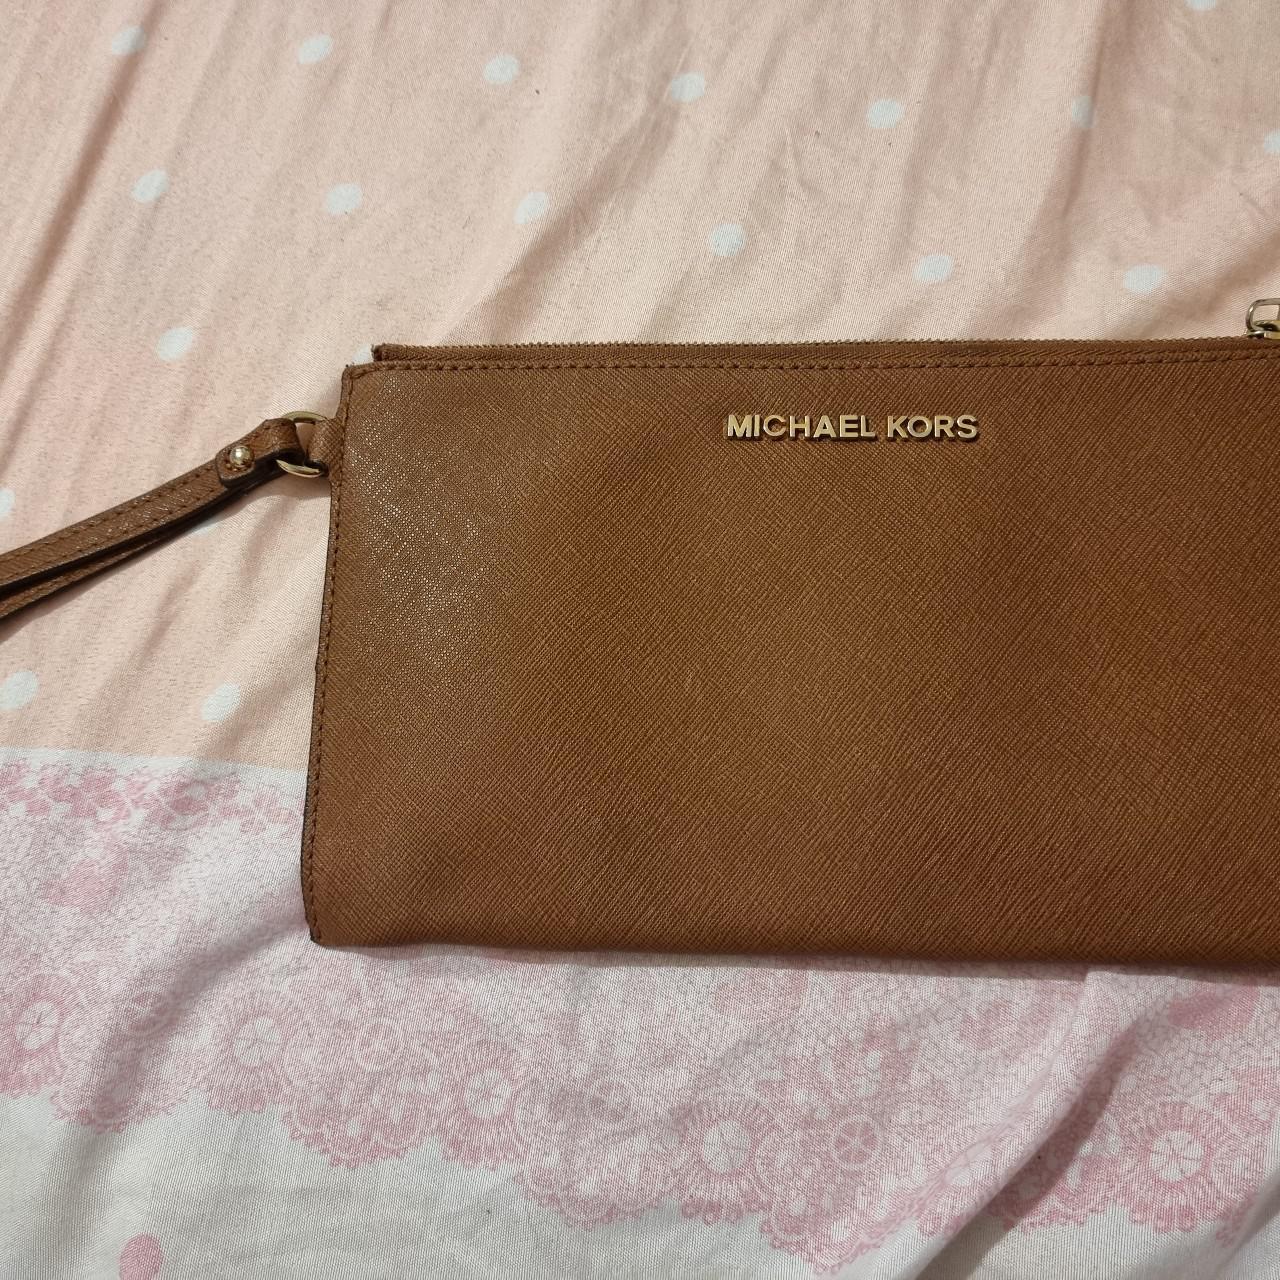 Handbags Pu Leather Michael Kors Handbag, For Office, Size: H-10inch  W-13inch at Rs 1999/bag in Mumbai